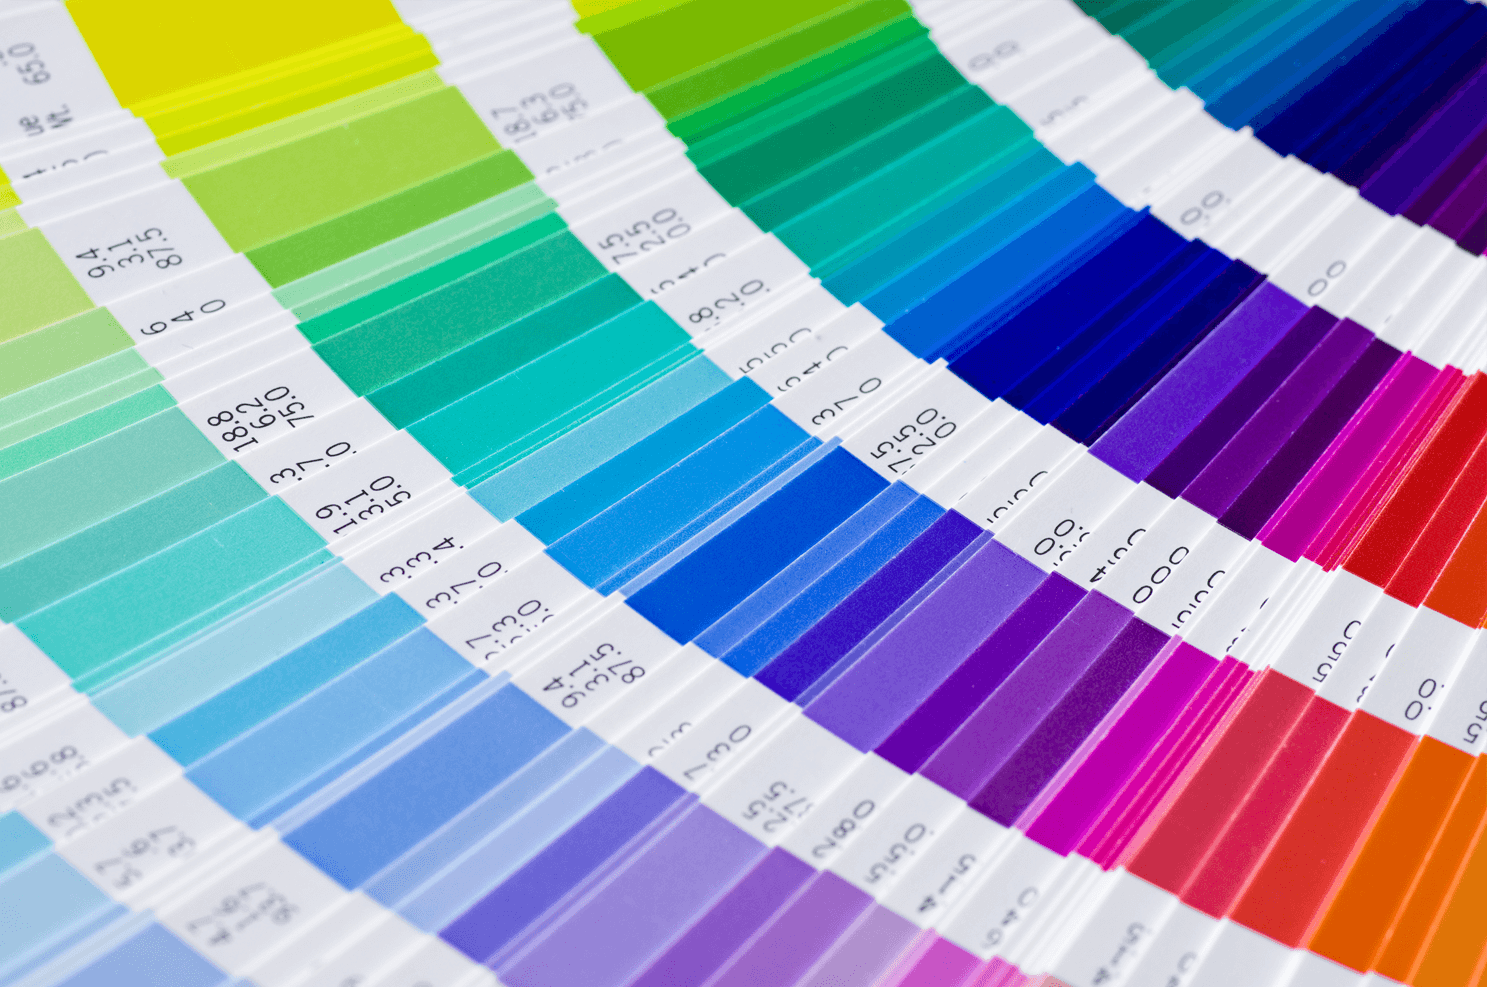 Printed colourful paper